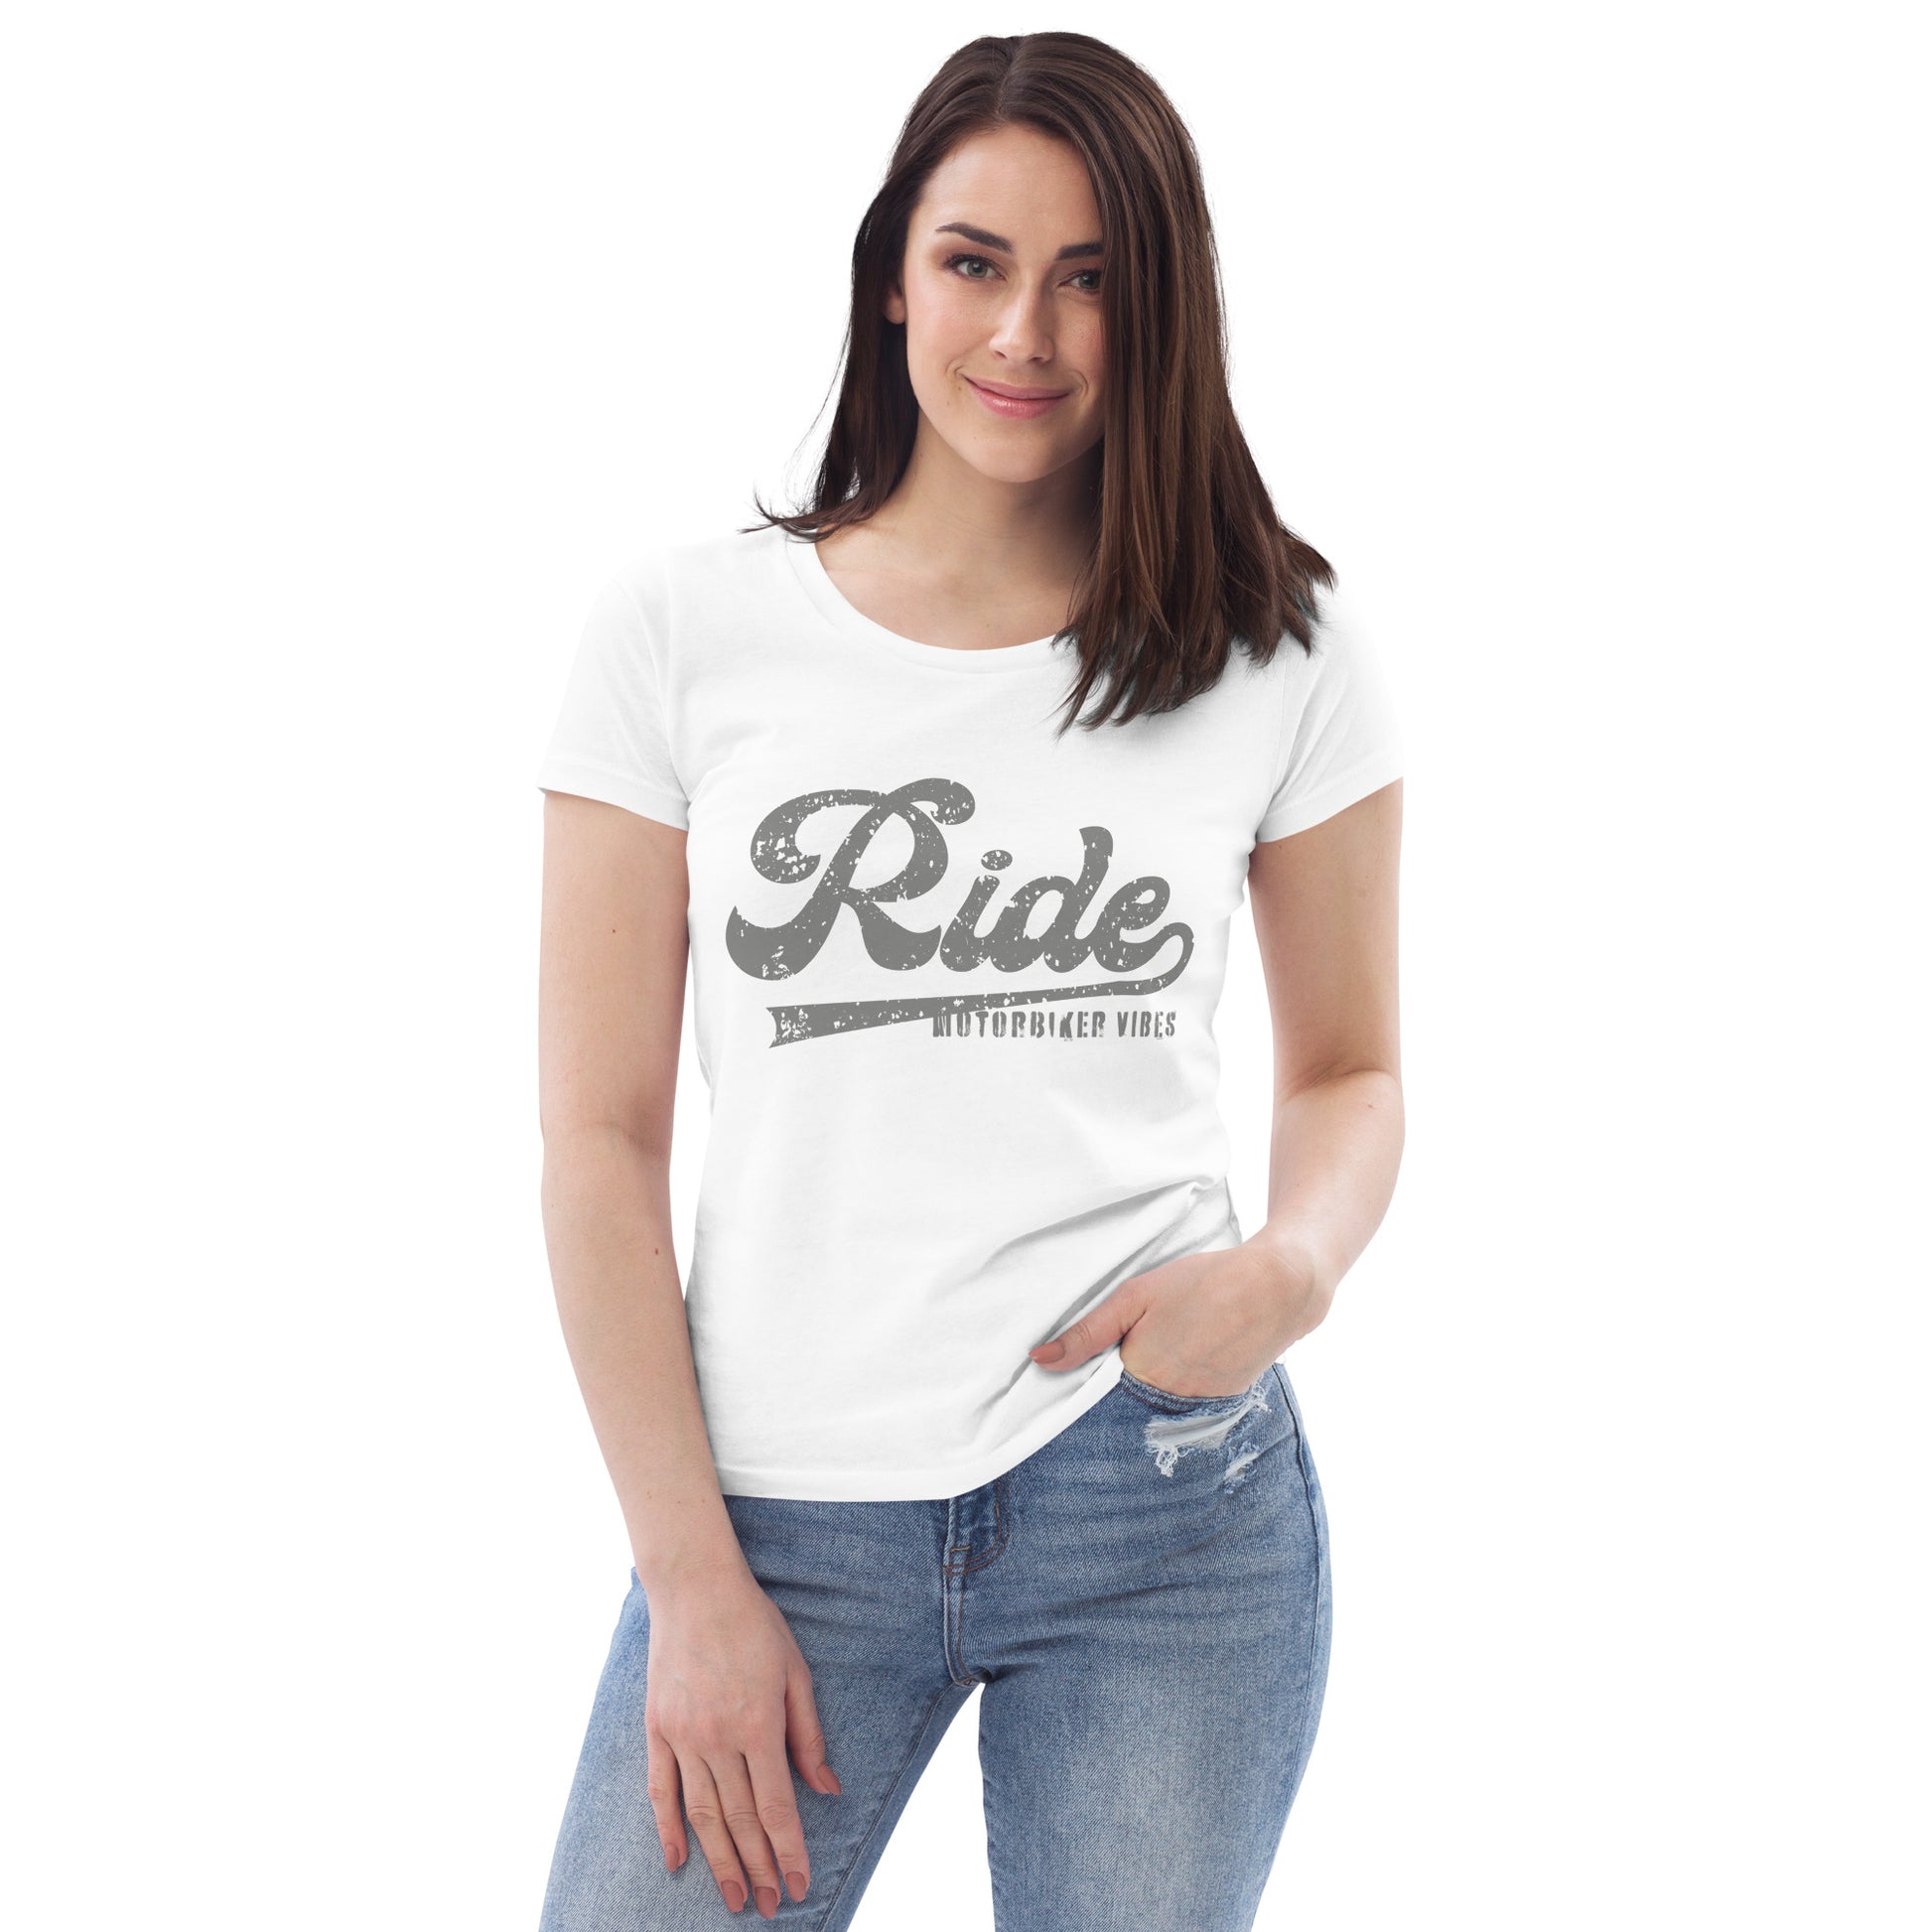 TIME OF VIBES - Women's fitted eco tee RIDE (White) - €32.00